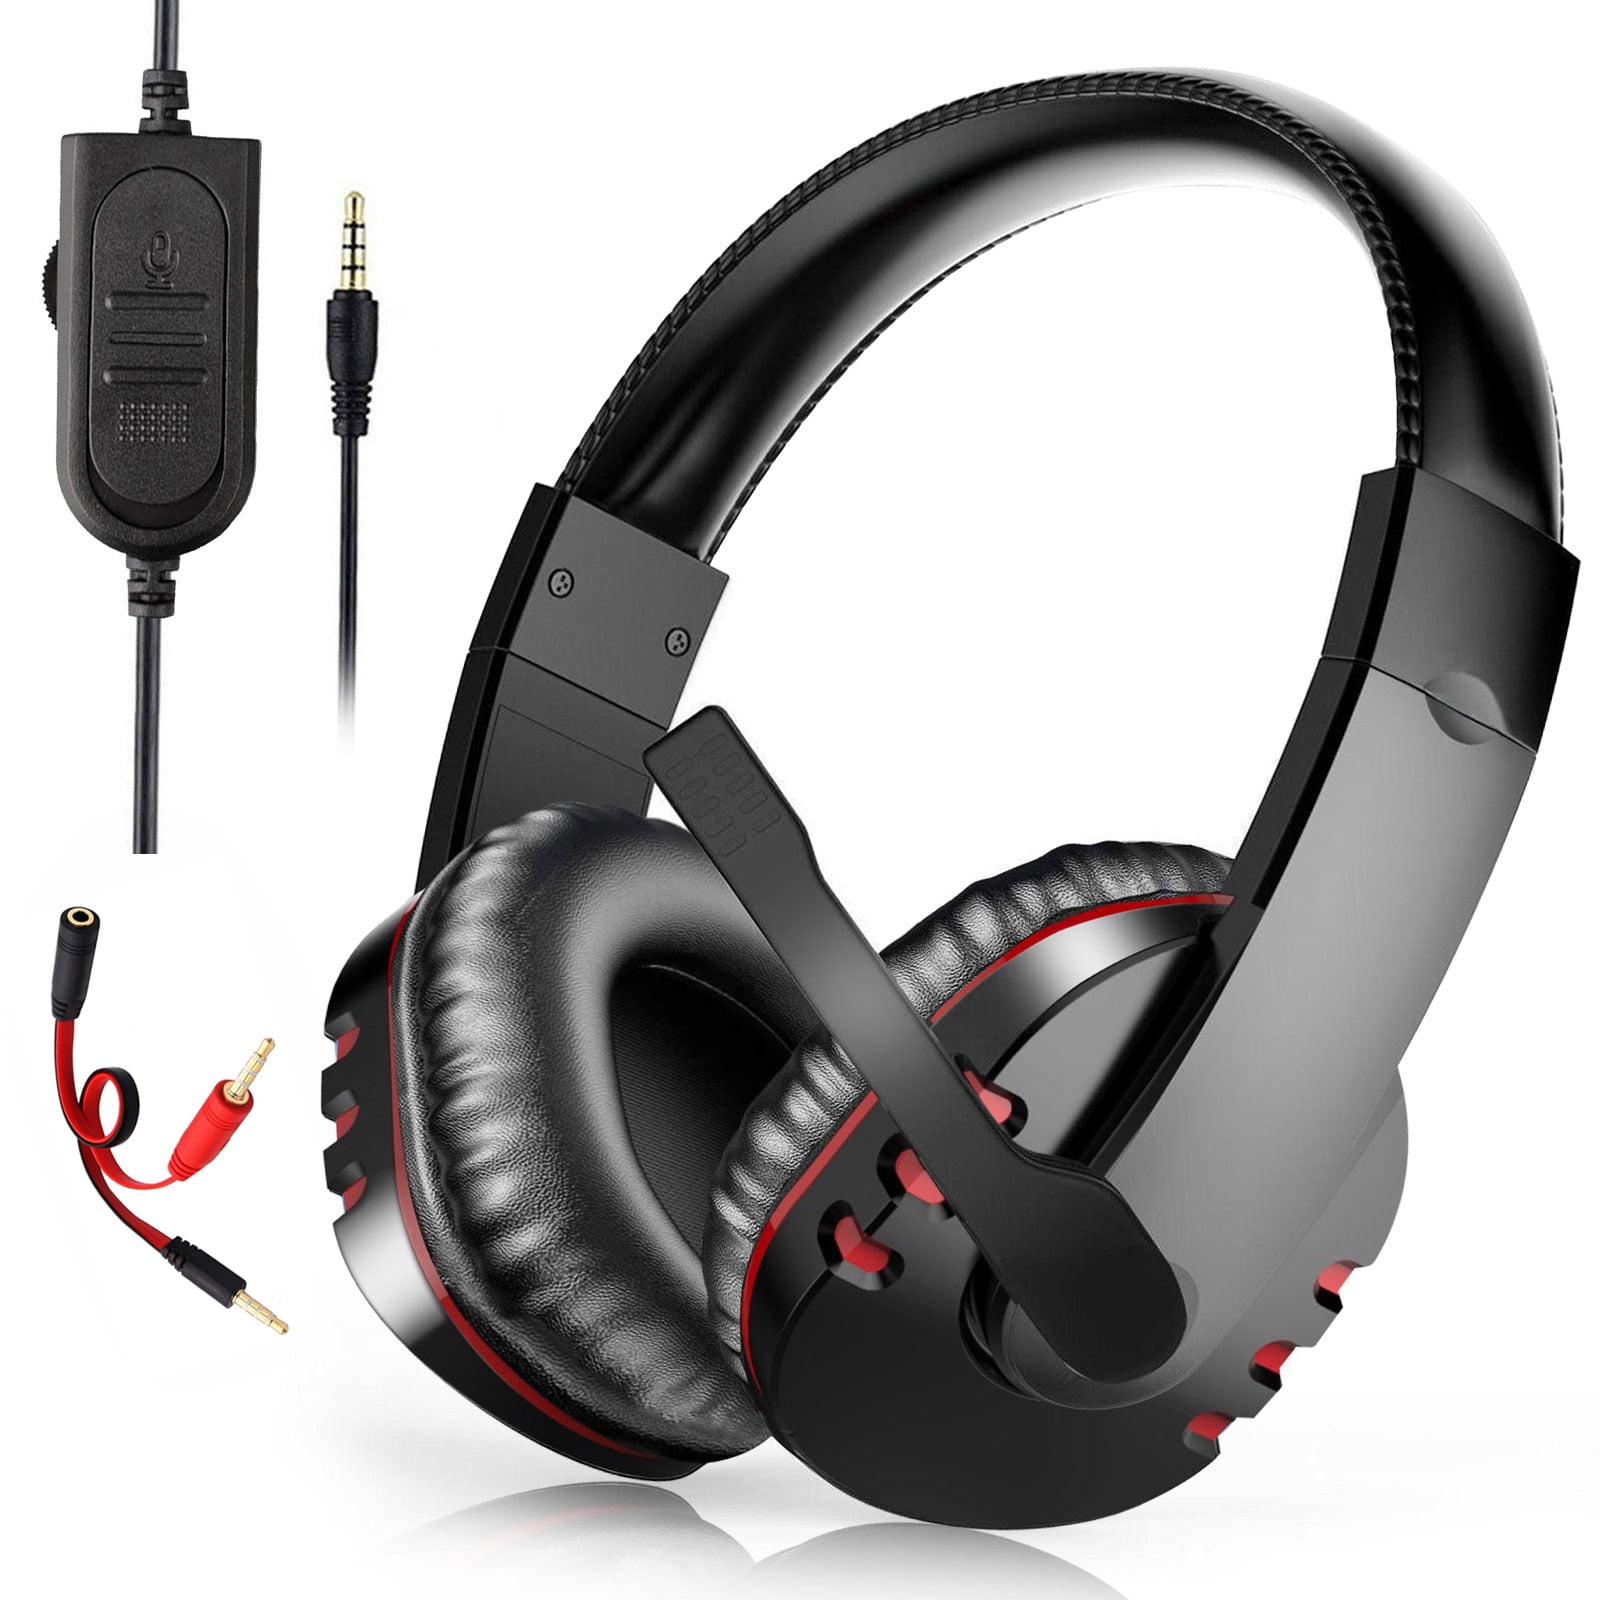 Stereo Gaming Headset for PC, PS4, Xbox One, EEEkit Gaming Headphones with Mic Noise Cancelling, Stereo Surround 3.5mm Over-Ear Wired for Nintendo Switch, Laptop, Desktop, - Walmart.com